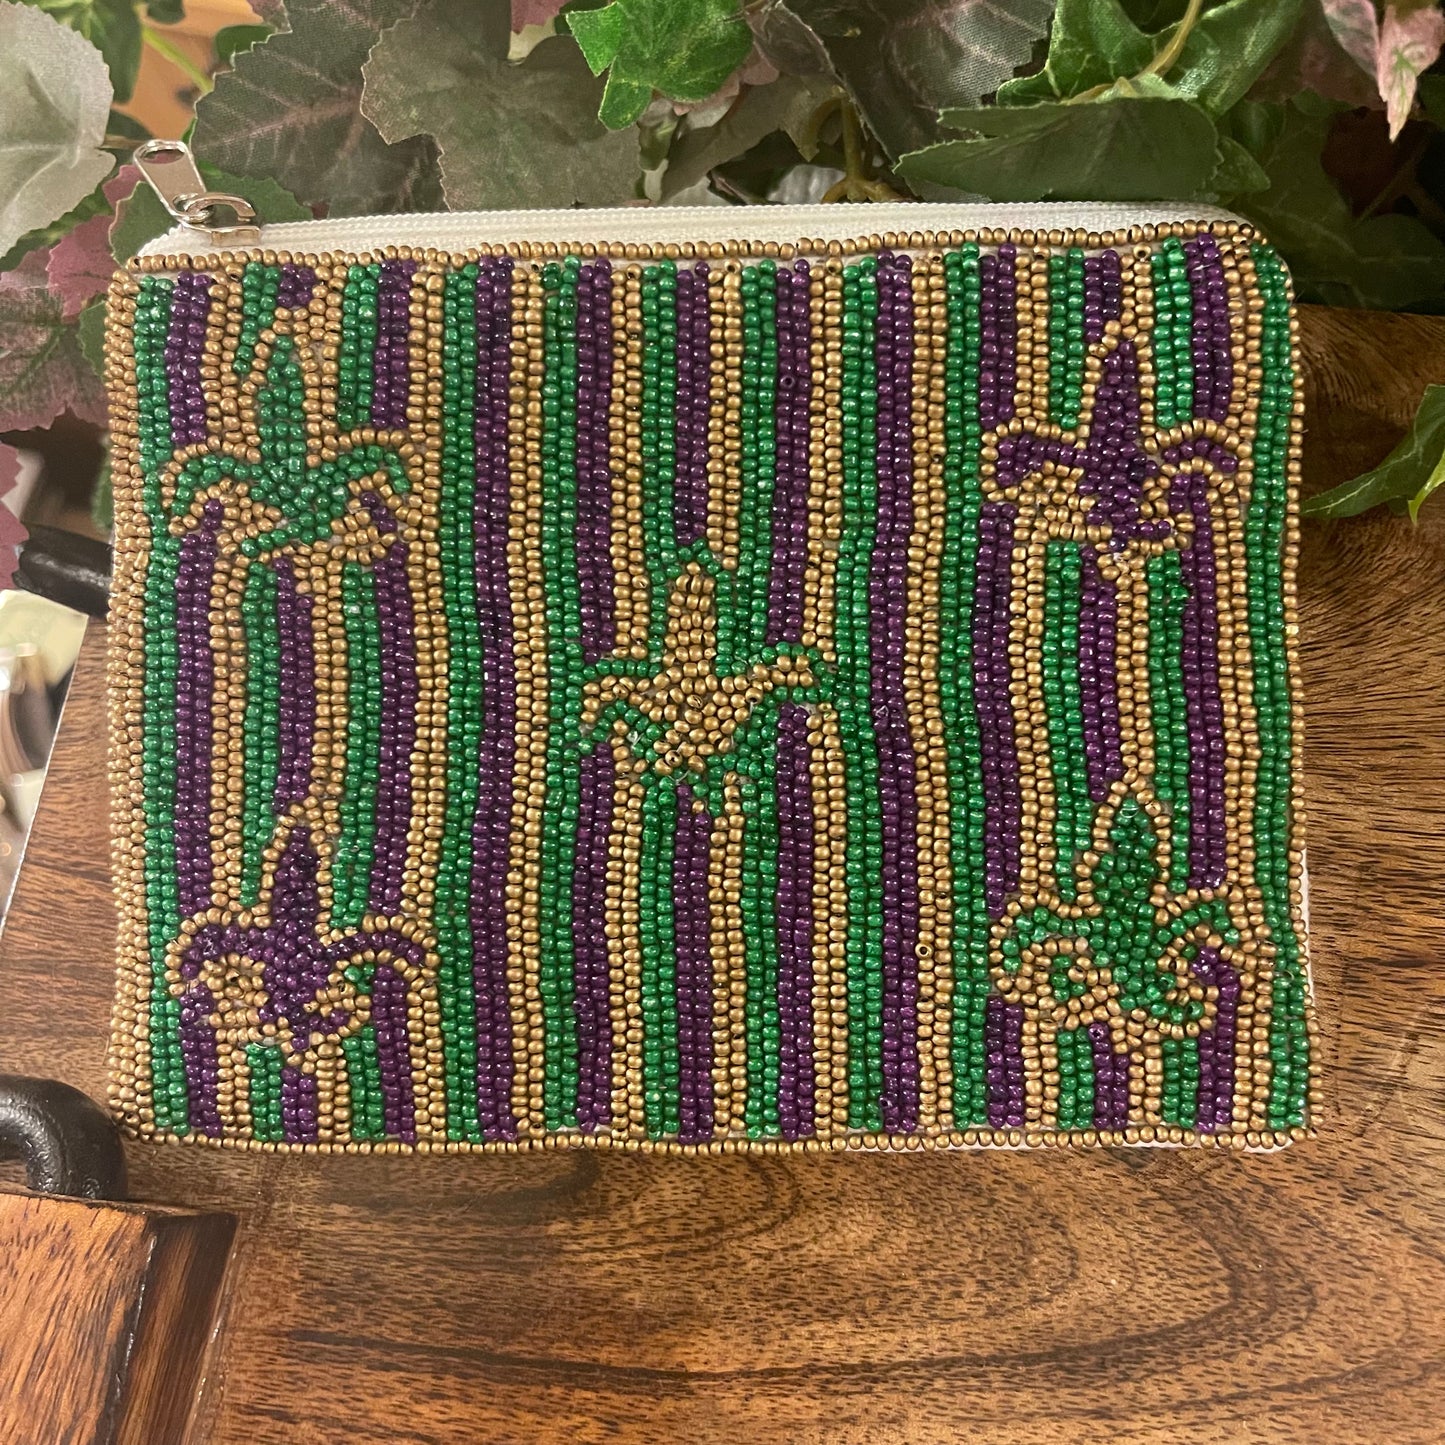 Mardi Gras Seed Bead Zippered Pouch